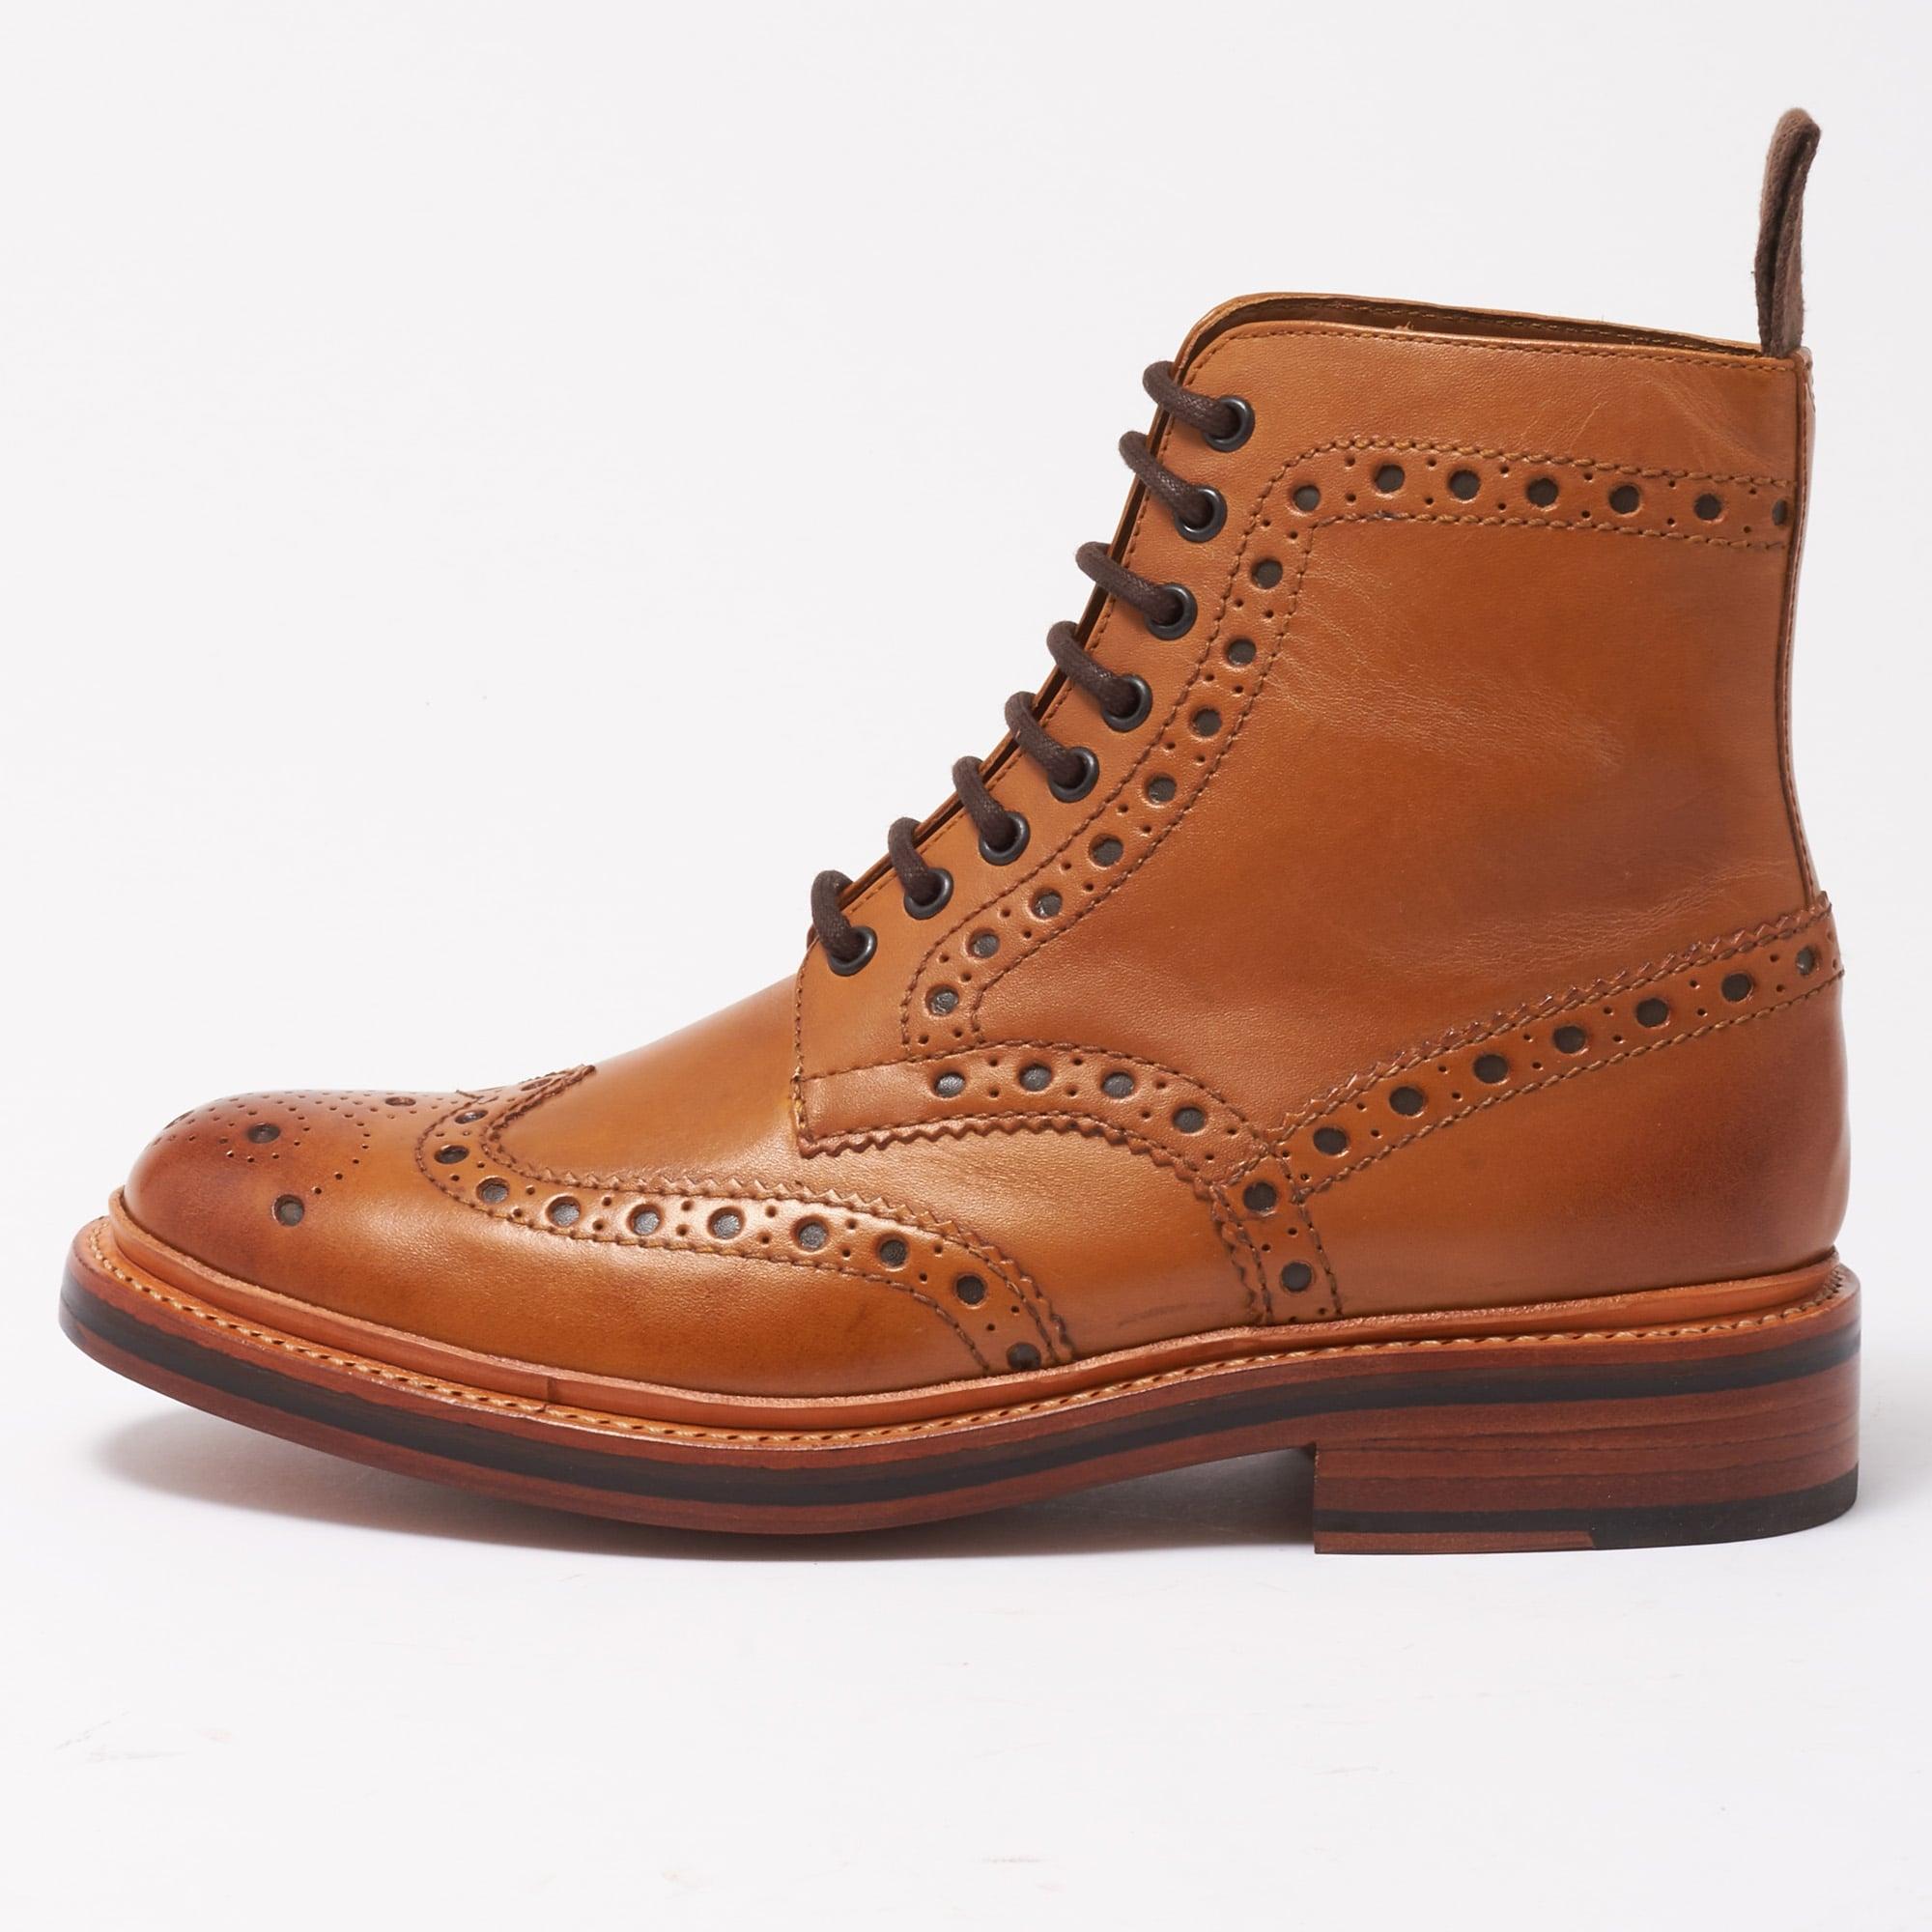 Grenson Leather Fred Calf Tan Brogue Boots 5068/02 for Men - Lyst